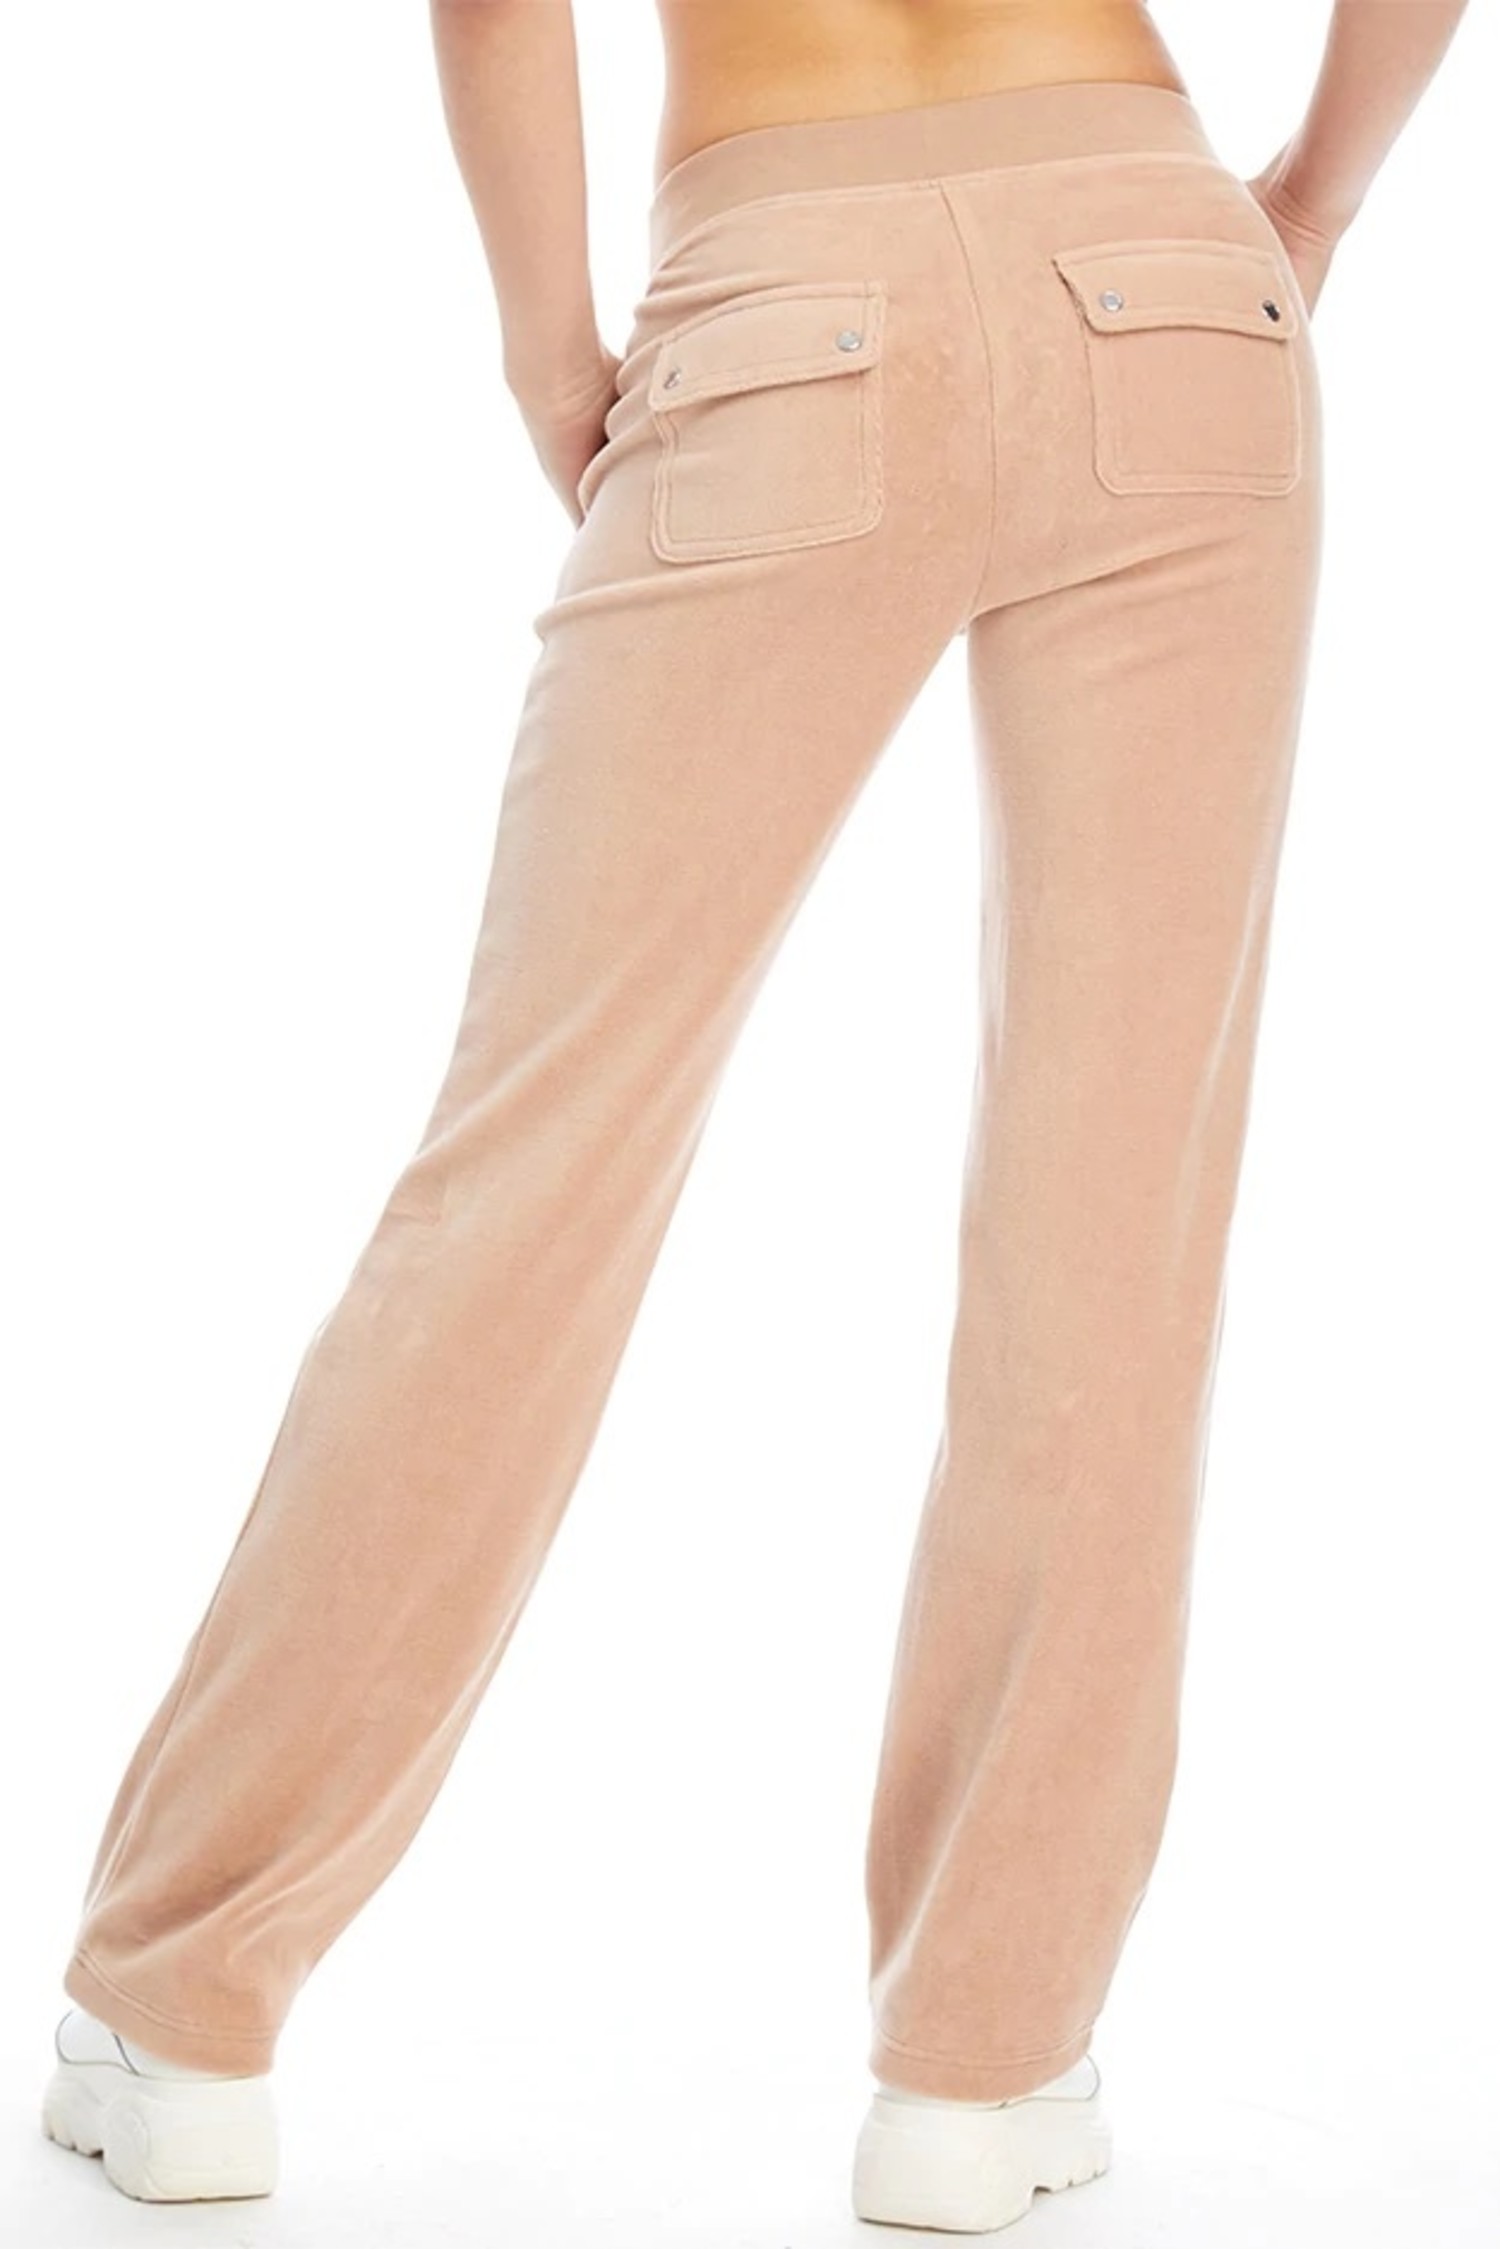 Juicy Couture Velour Track Pants - Wine Red – Dolls Kill